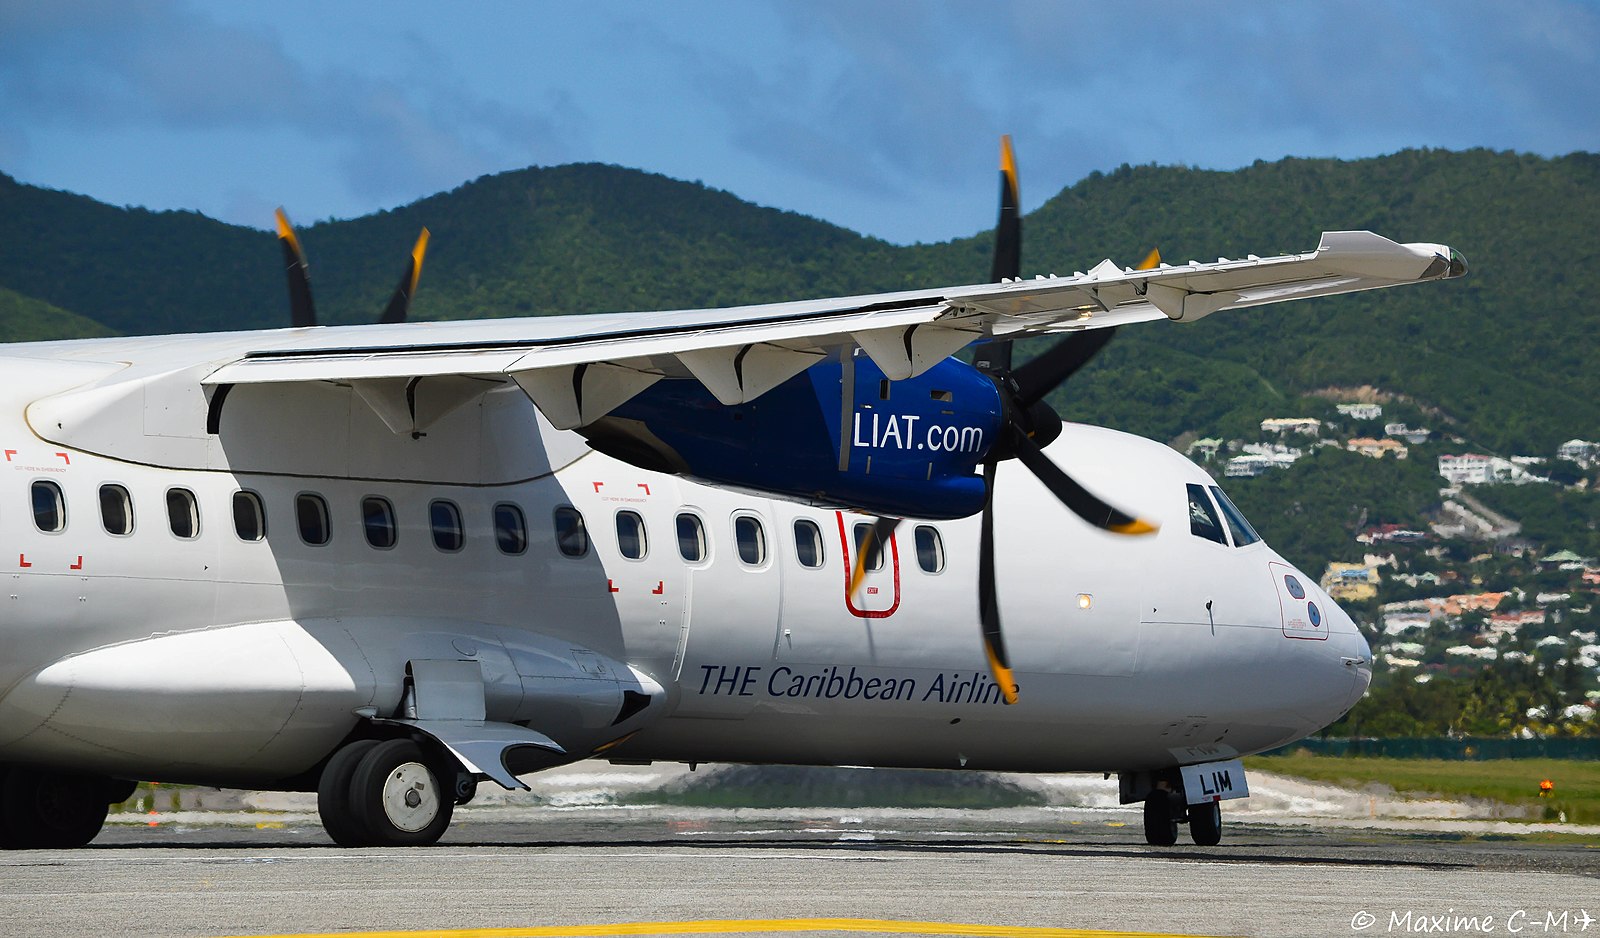 LIAT owes workers millions in severance